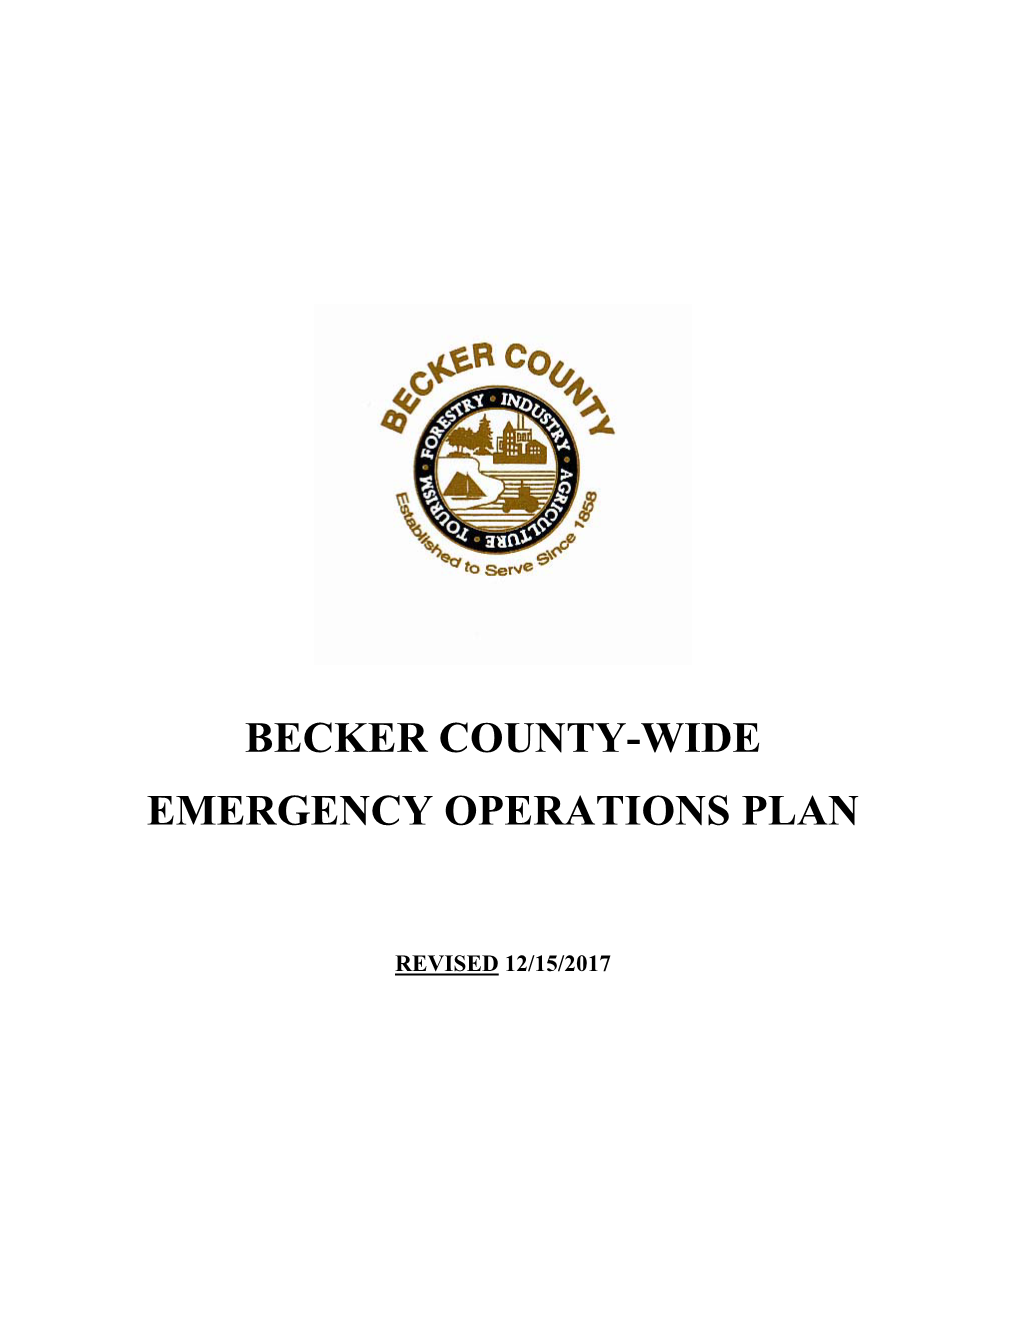 Becker County-Wide Emergency Operations Plan Has Three Primary Parts